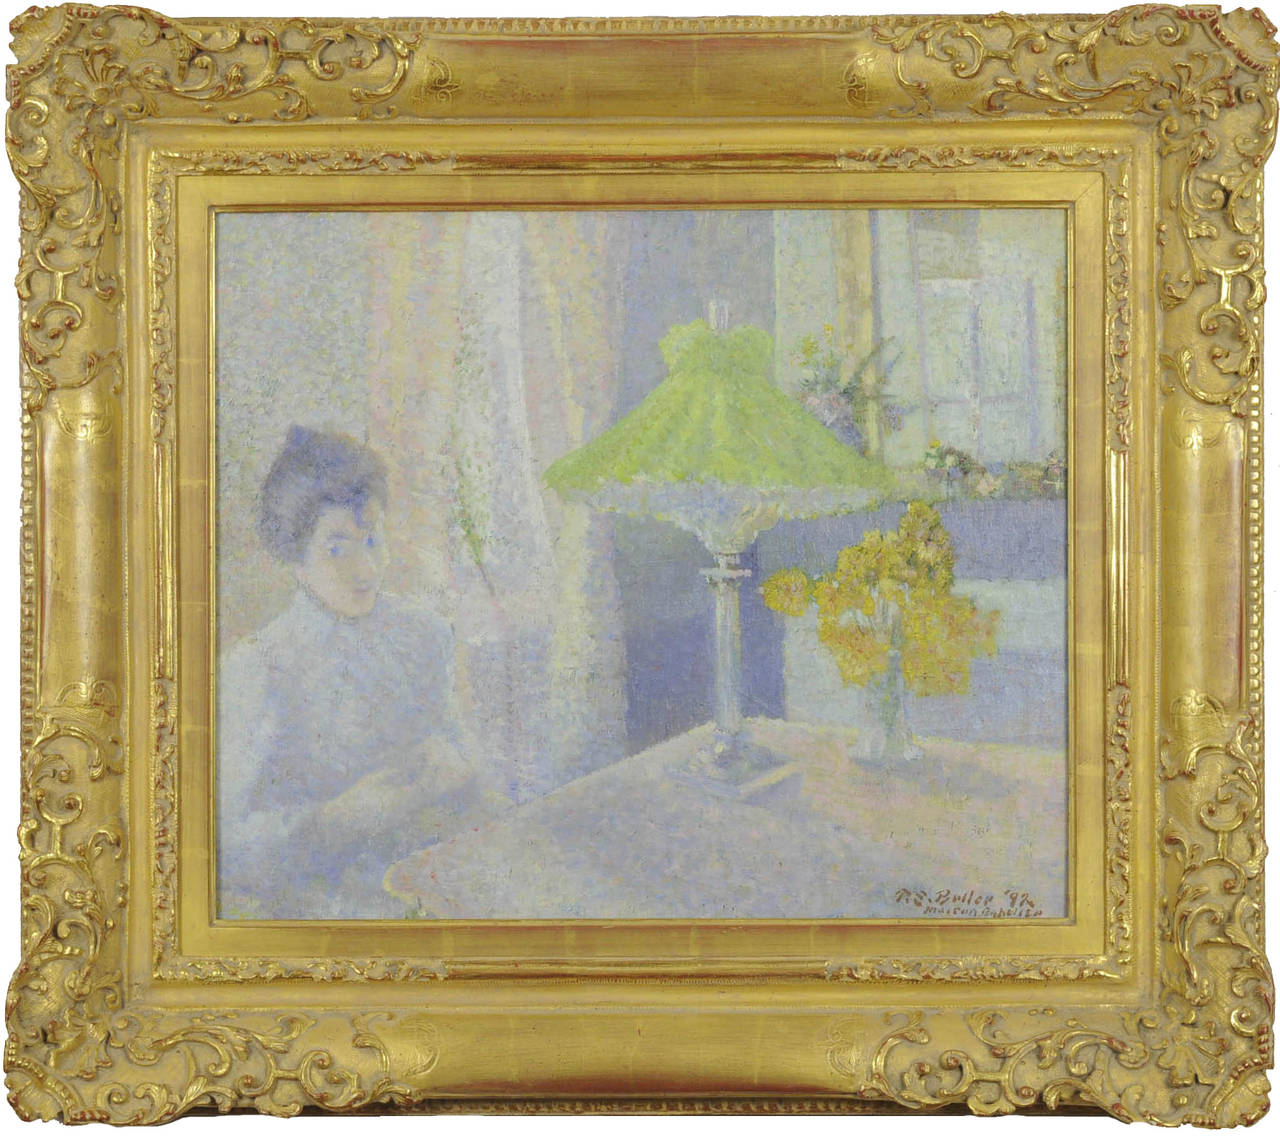 Suzanne by the Lamp, Maison Baptiste - Painting by Theodore Earl Butler